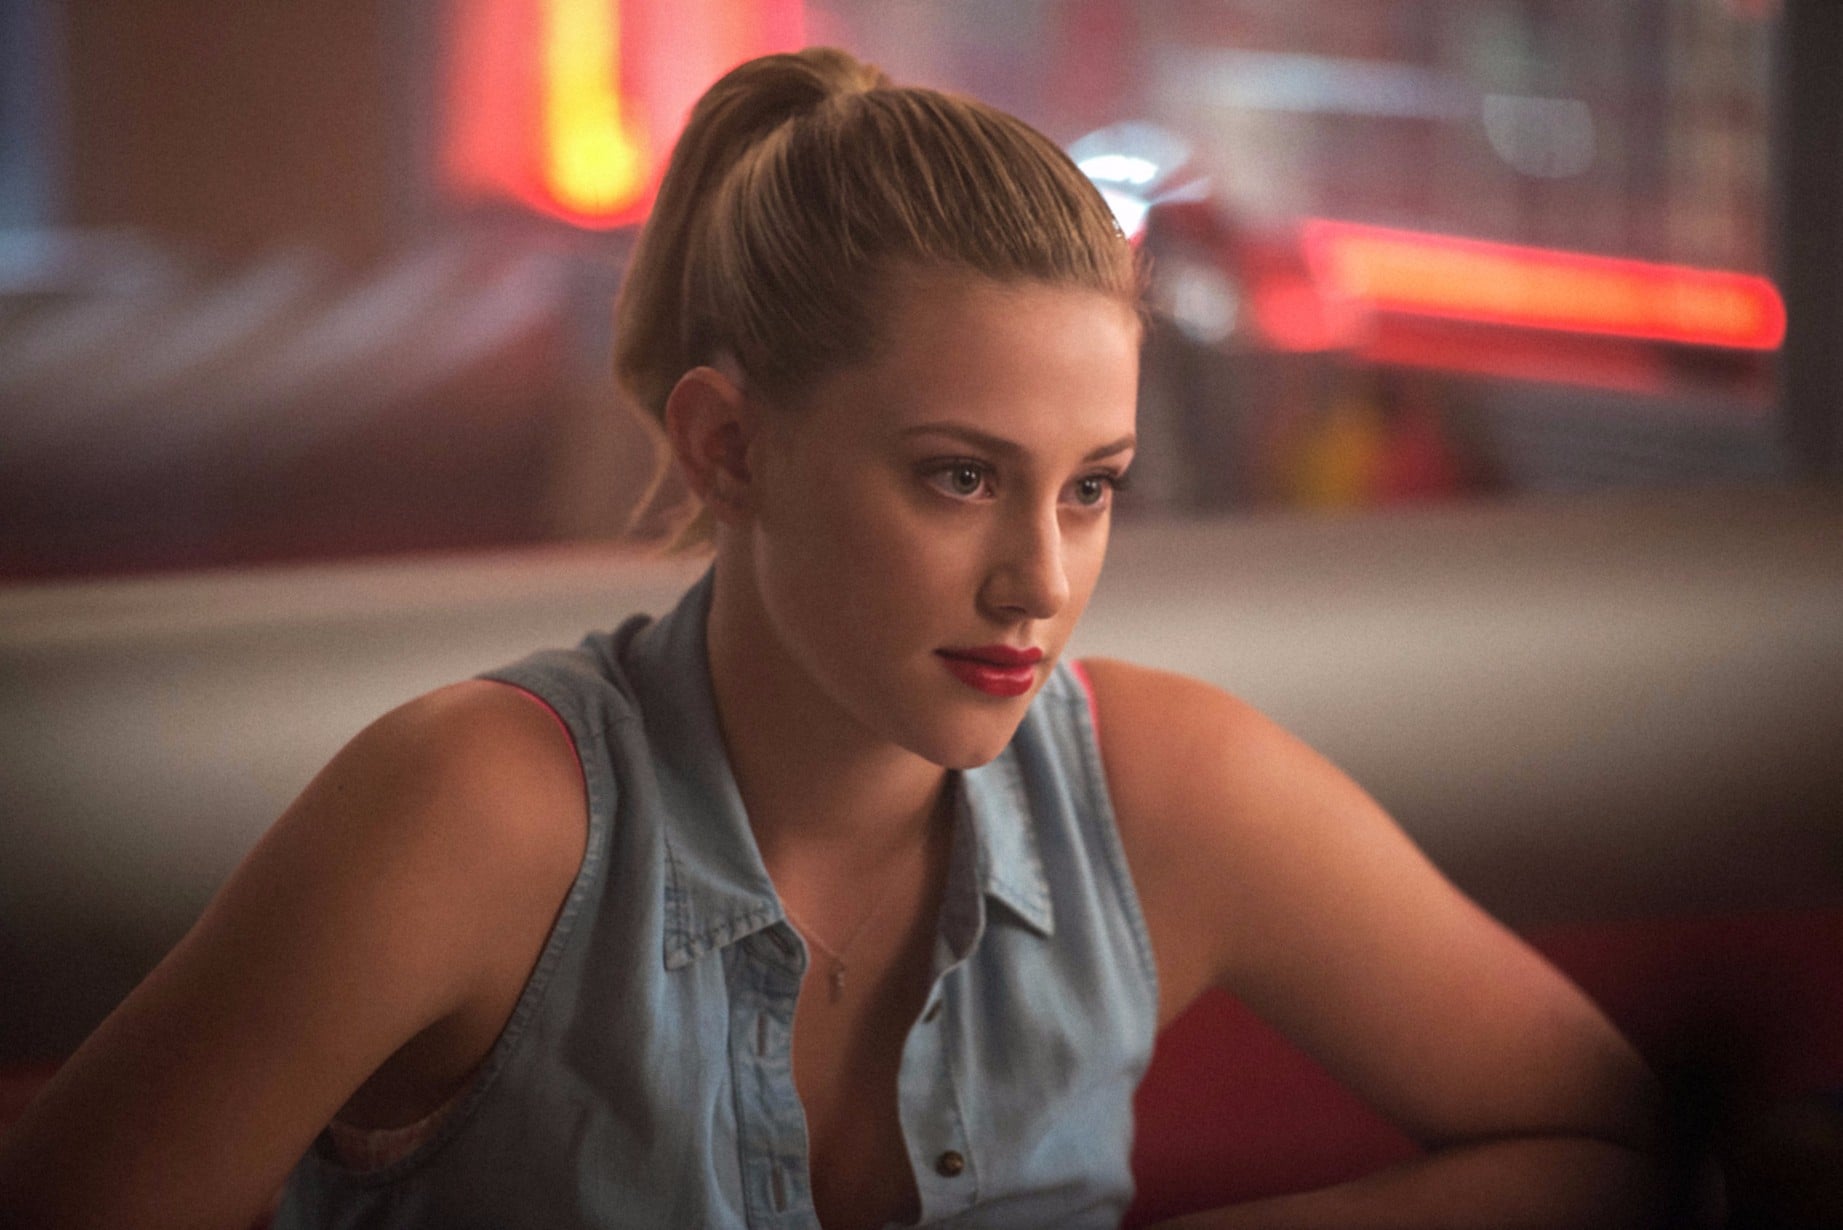 What Makeup Does Betty Cooper Wear?